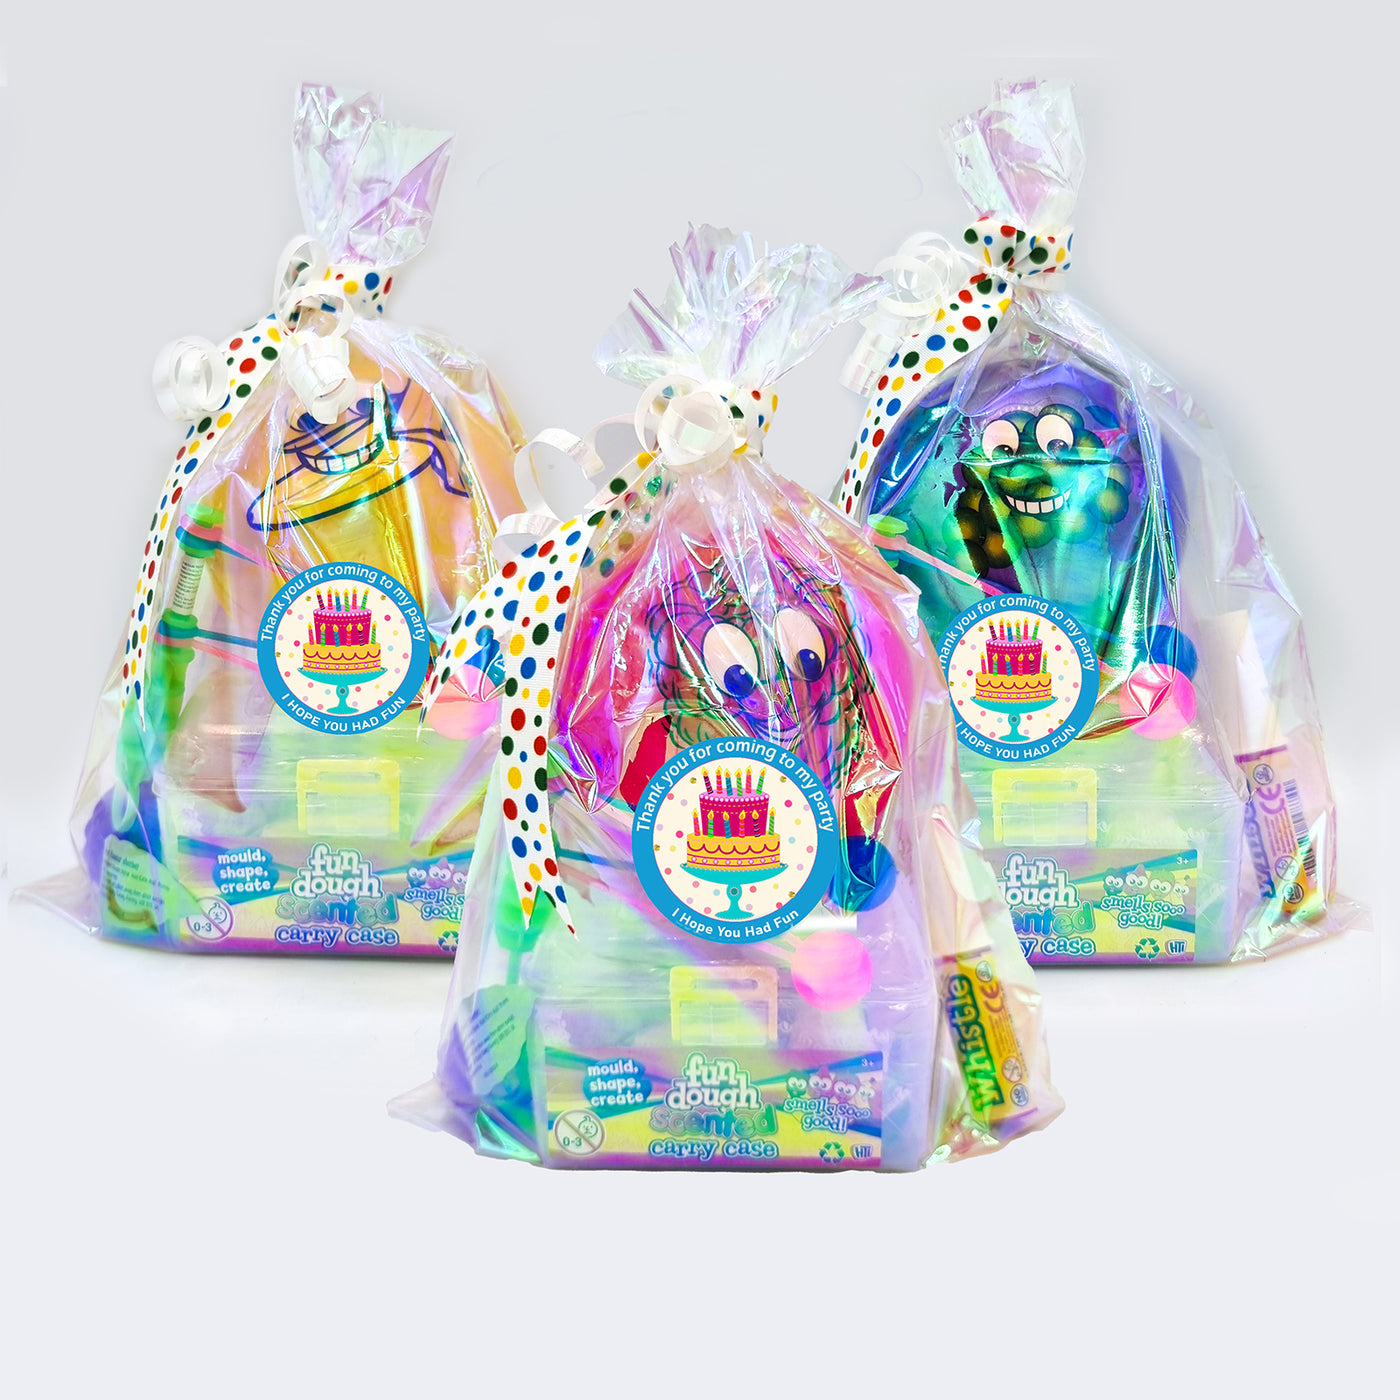 Pre Filled Fragranced Tutti Fruity Cake Birthday Party Favours Goody Bags With Toys And Sweets For Girls 